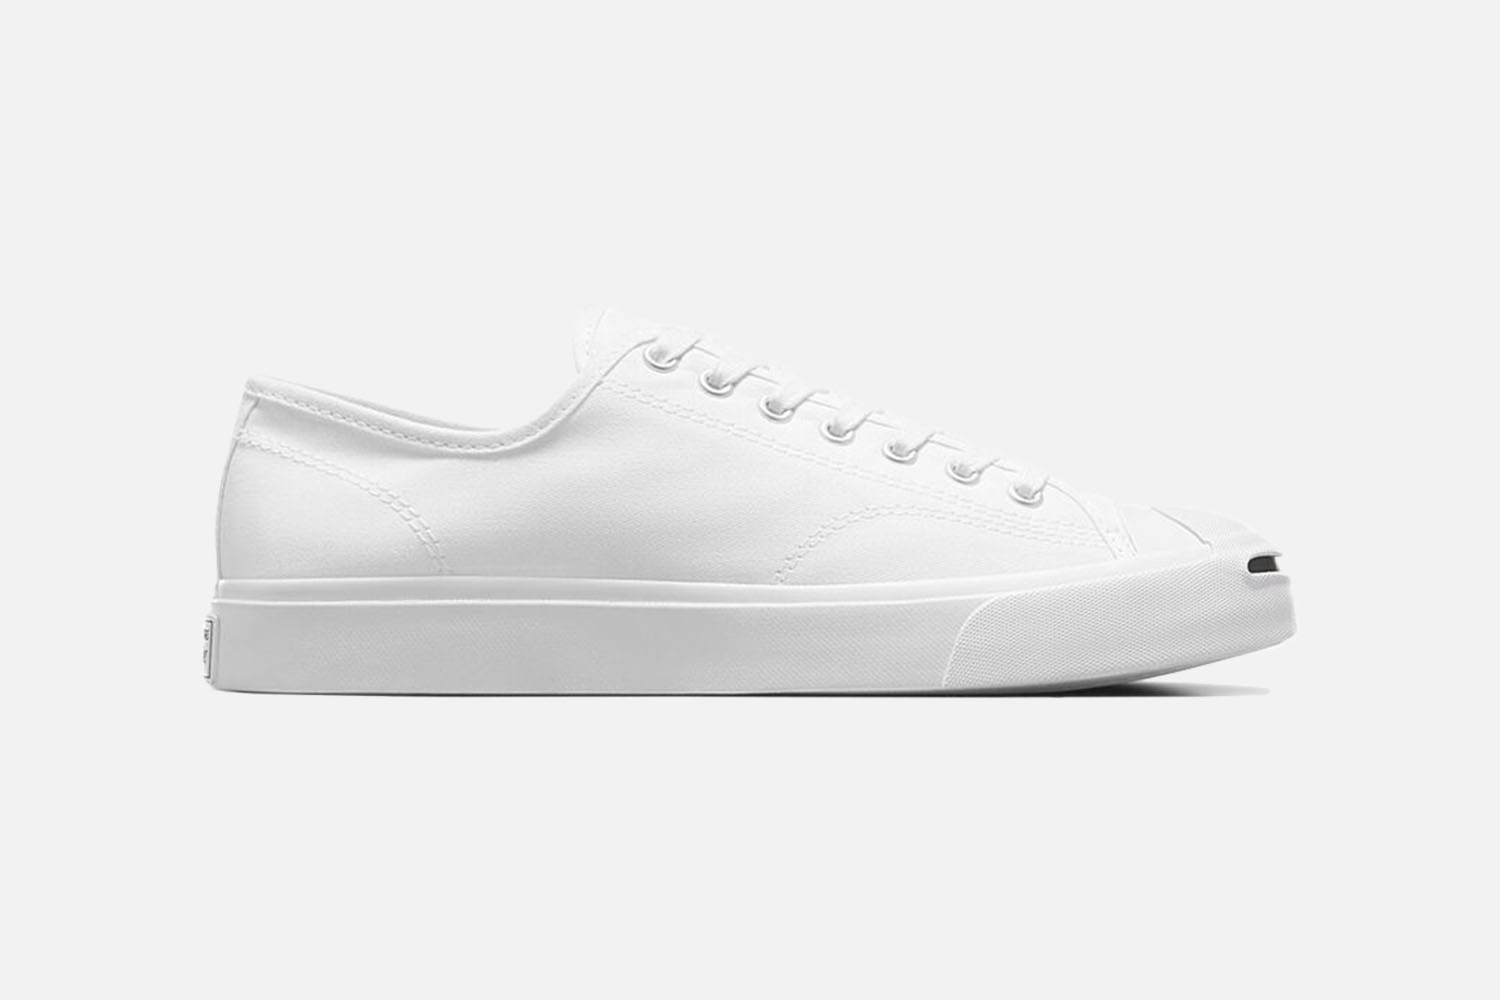 Converse Jack Purcell Canvas Sneaker